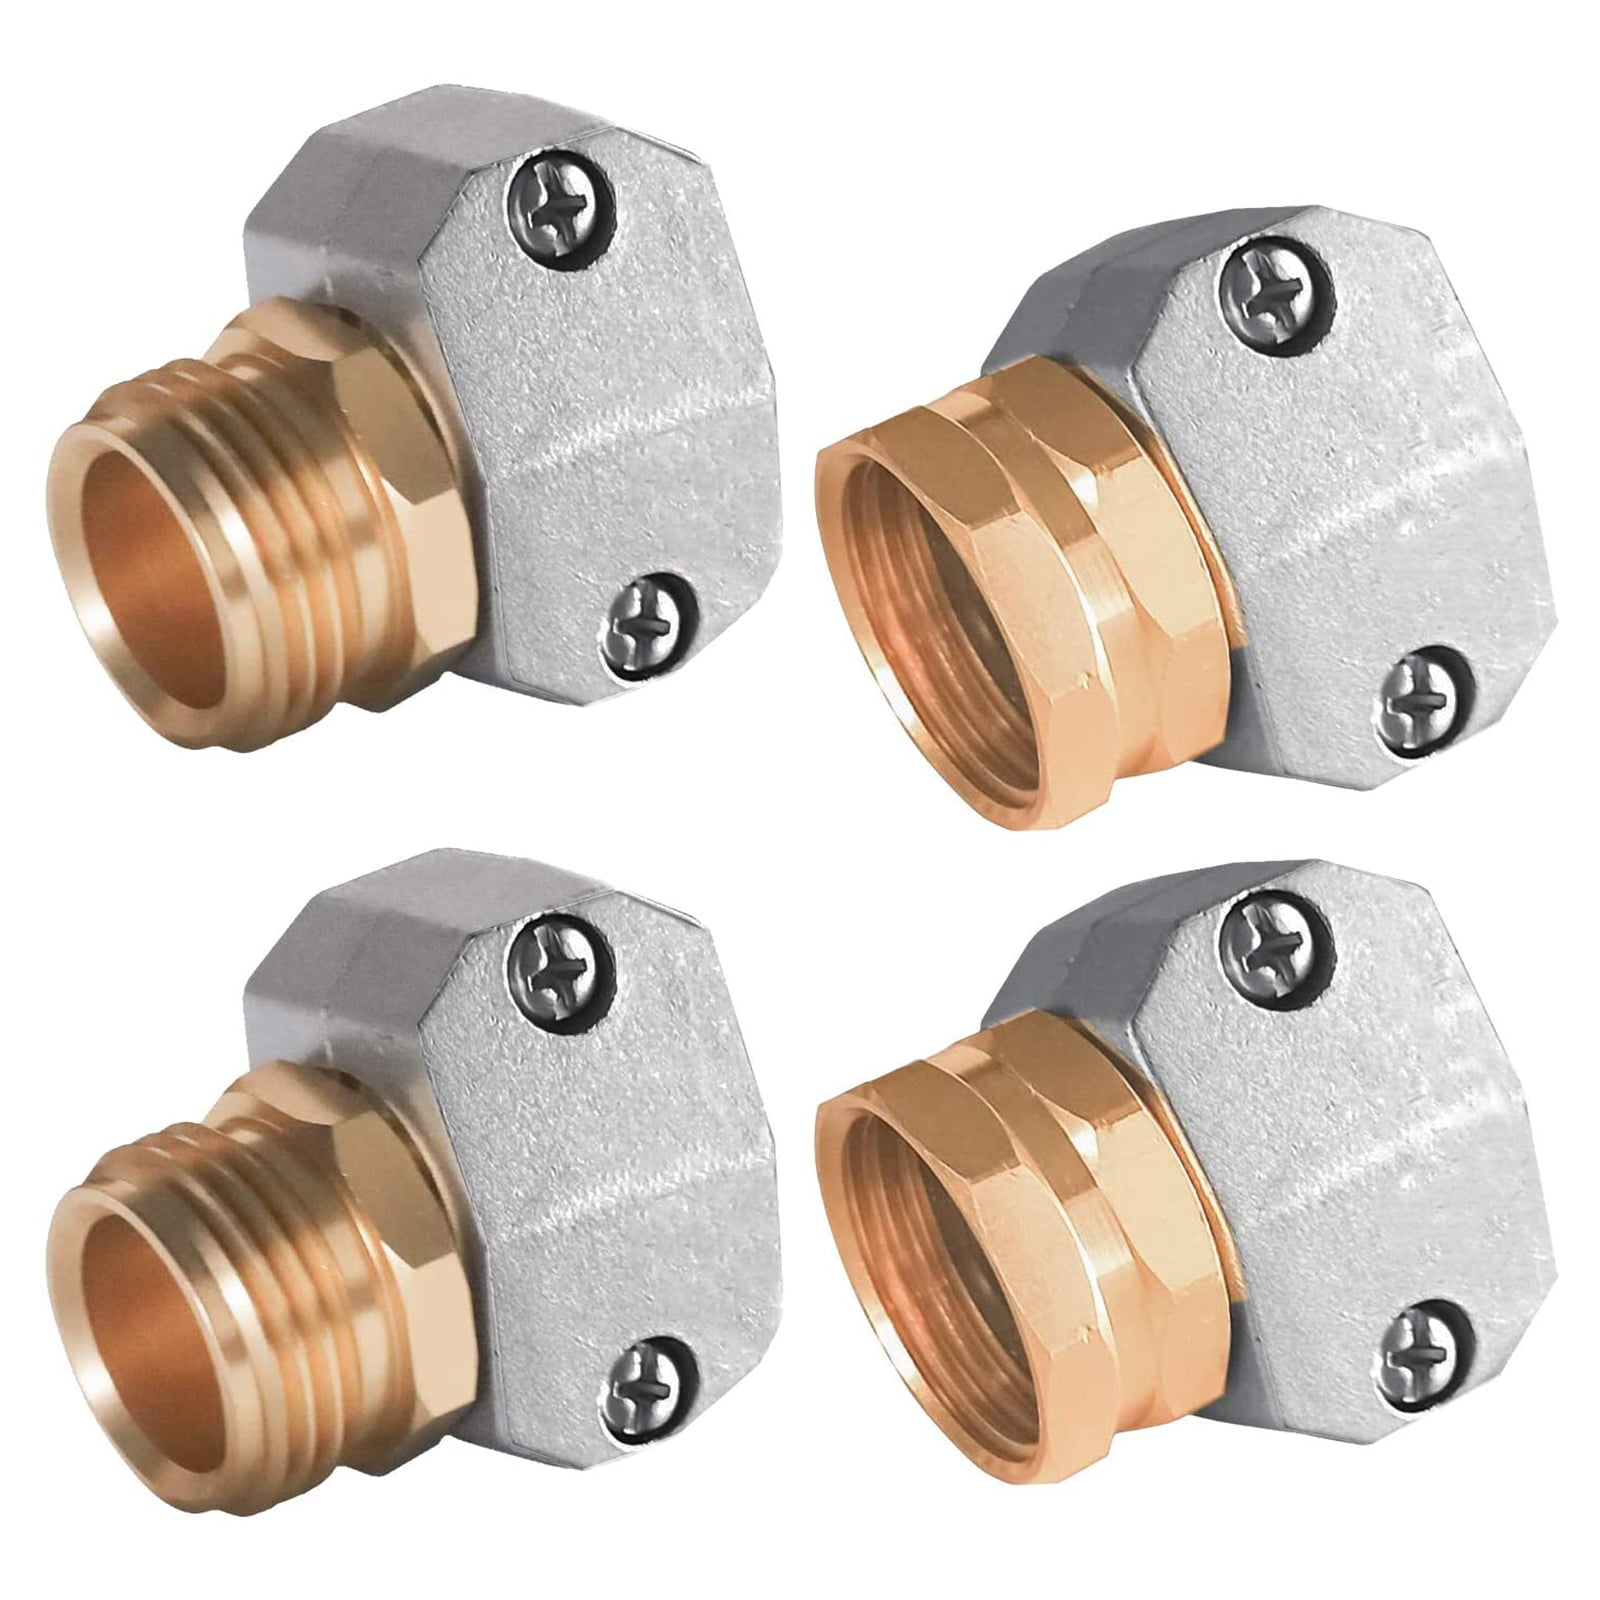 Details about   3 Sets 1/2" Garden Hose Mender Male Female End Repair Connector with clamp 